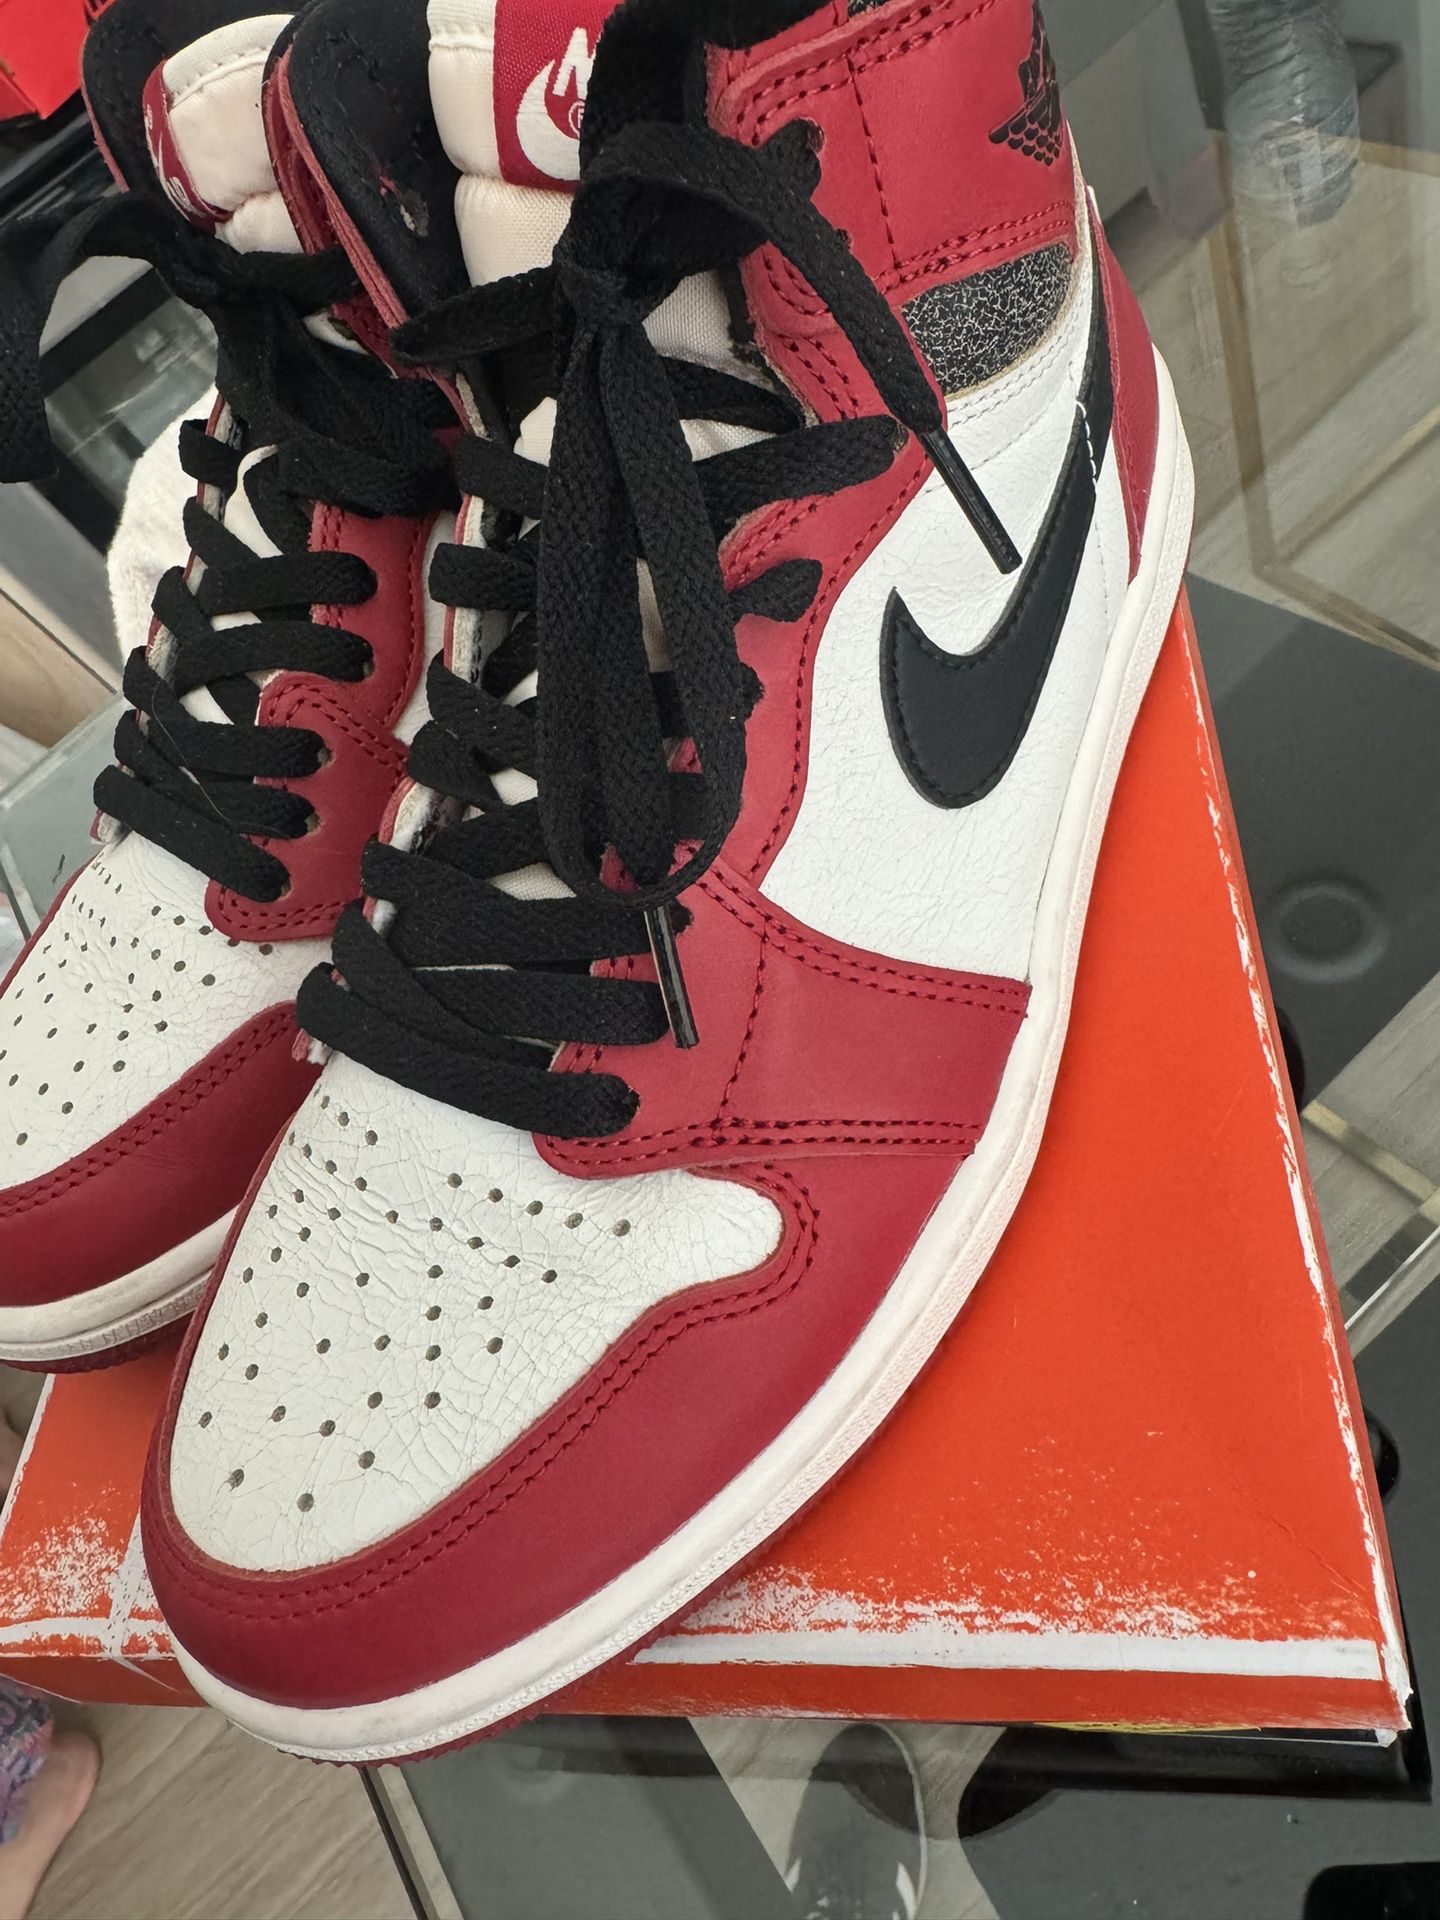 Jordan 1 Chicago Lost And Found 7.5 